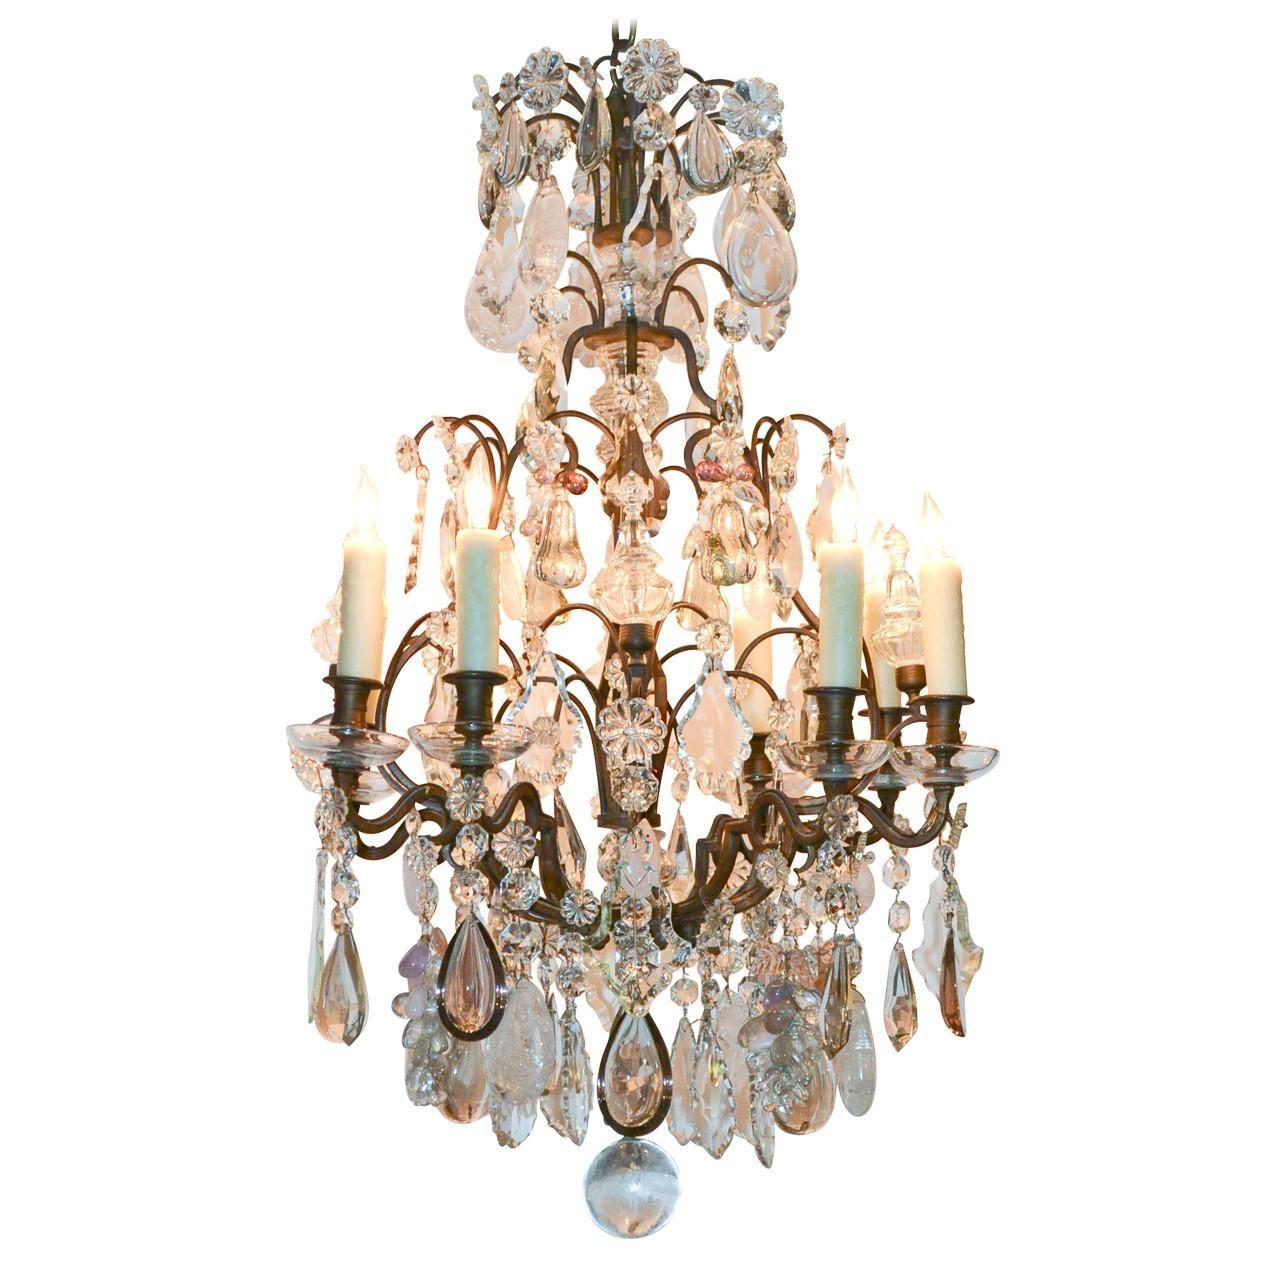 19th Century French Rock Crystal and Bronze Chandelier